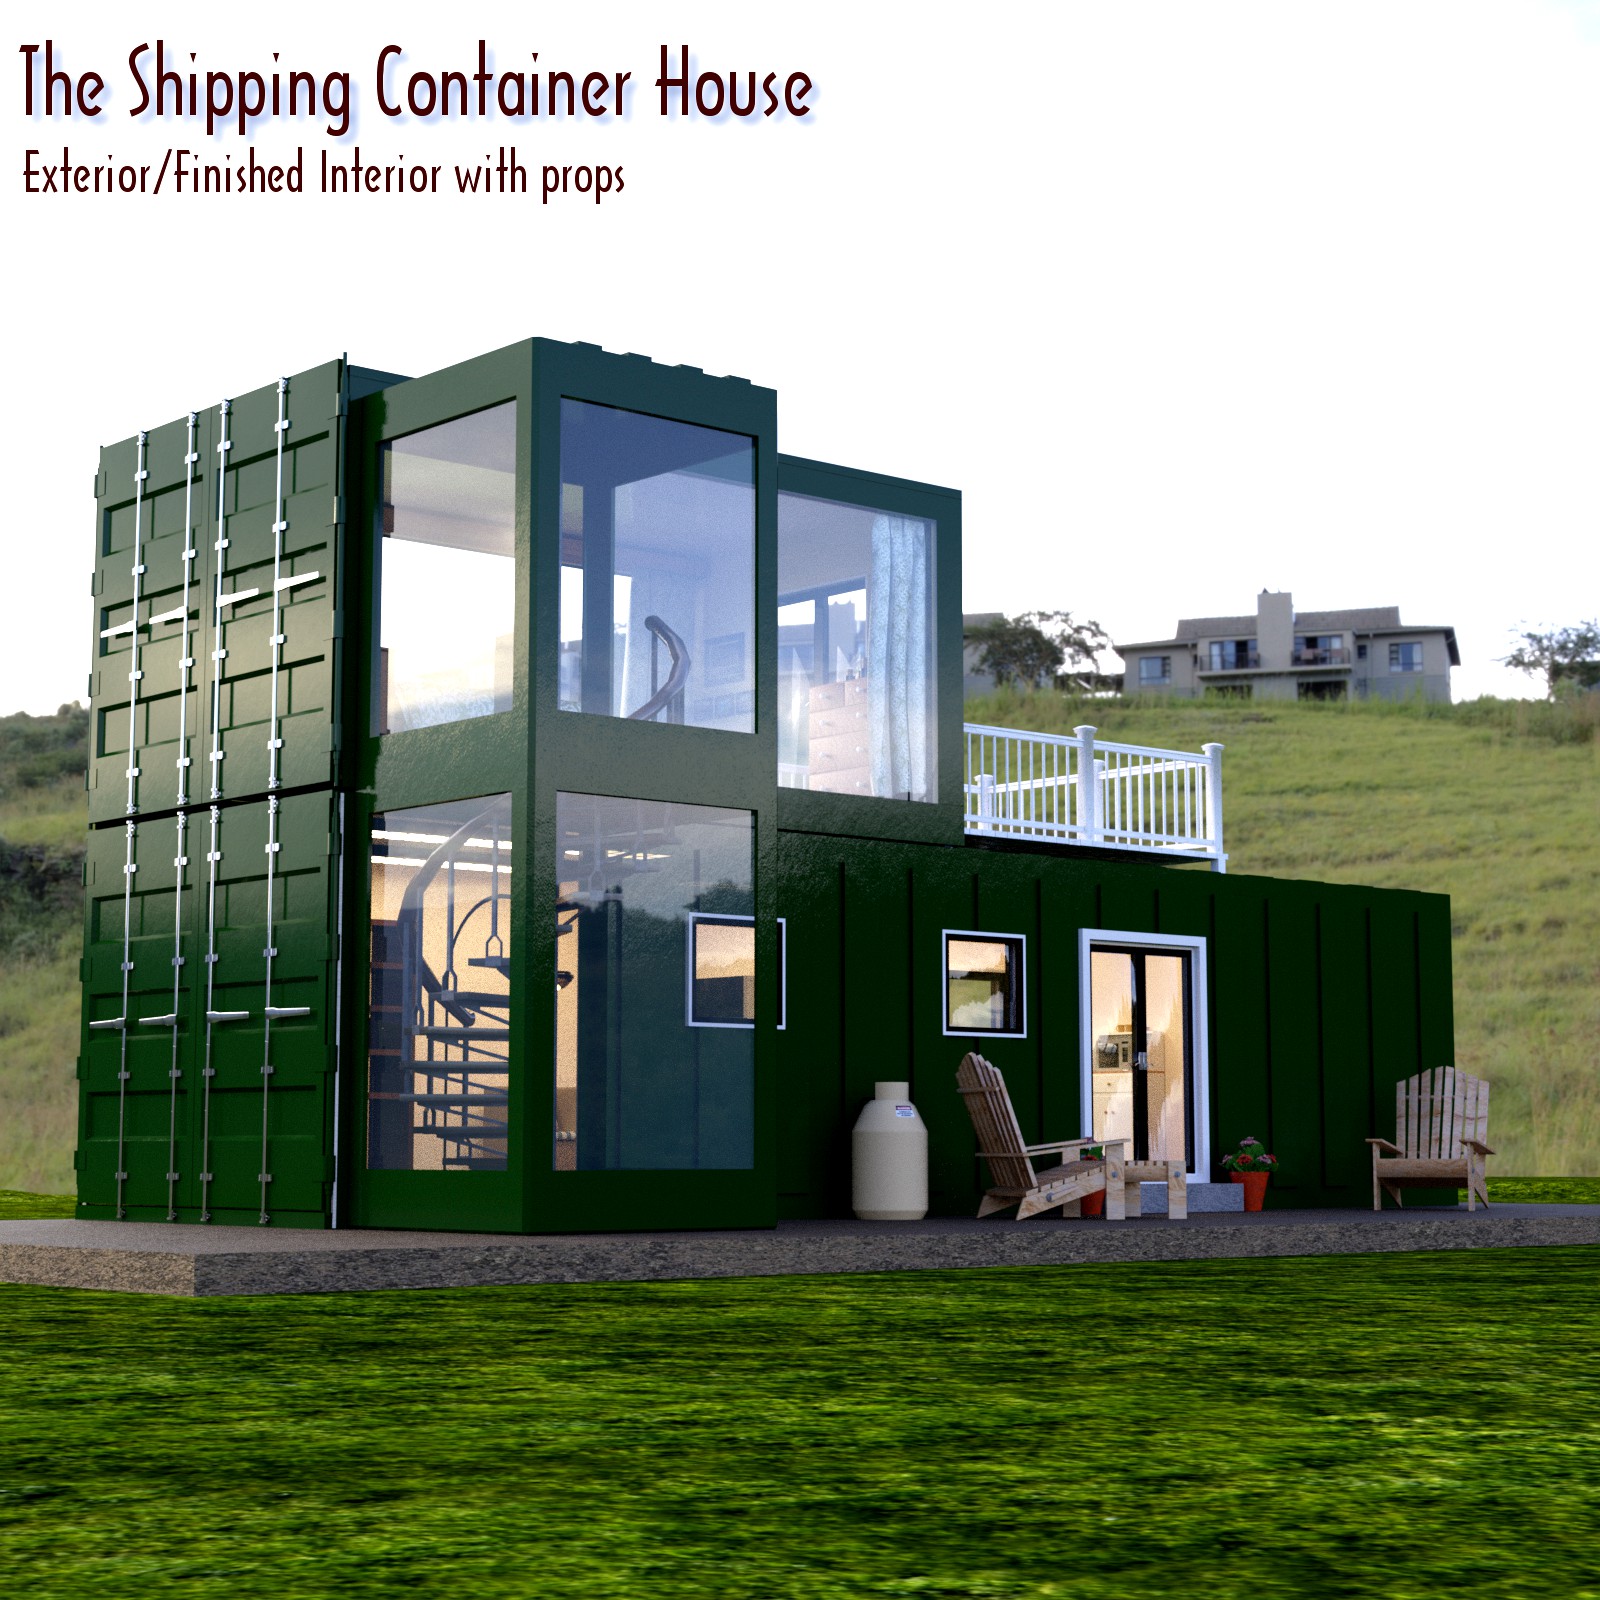 The Shipping Container House for DAZ Studio